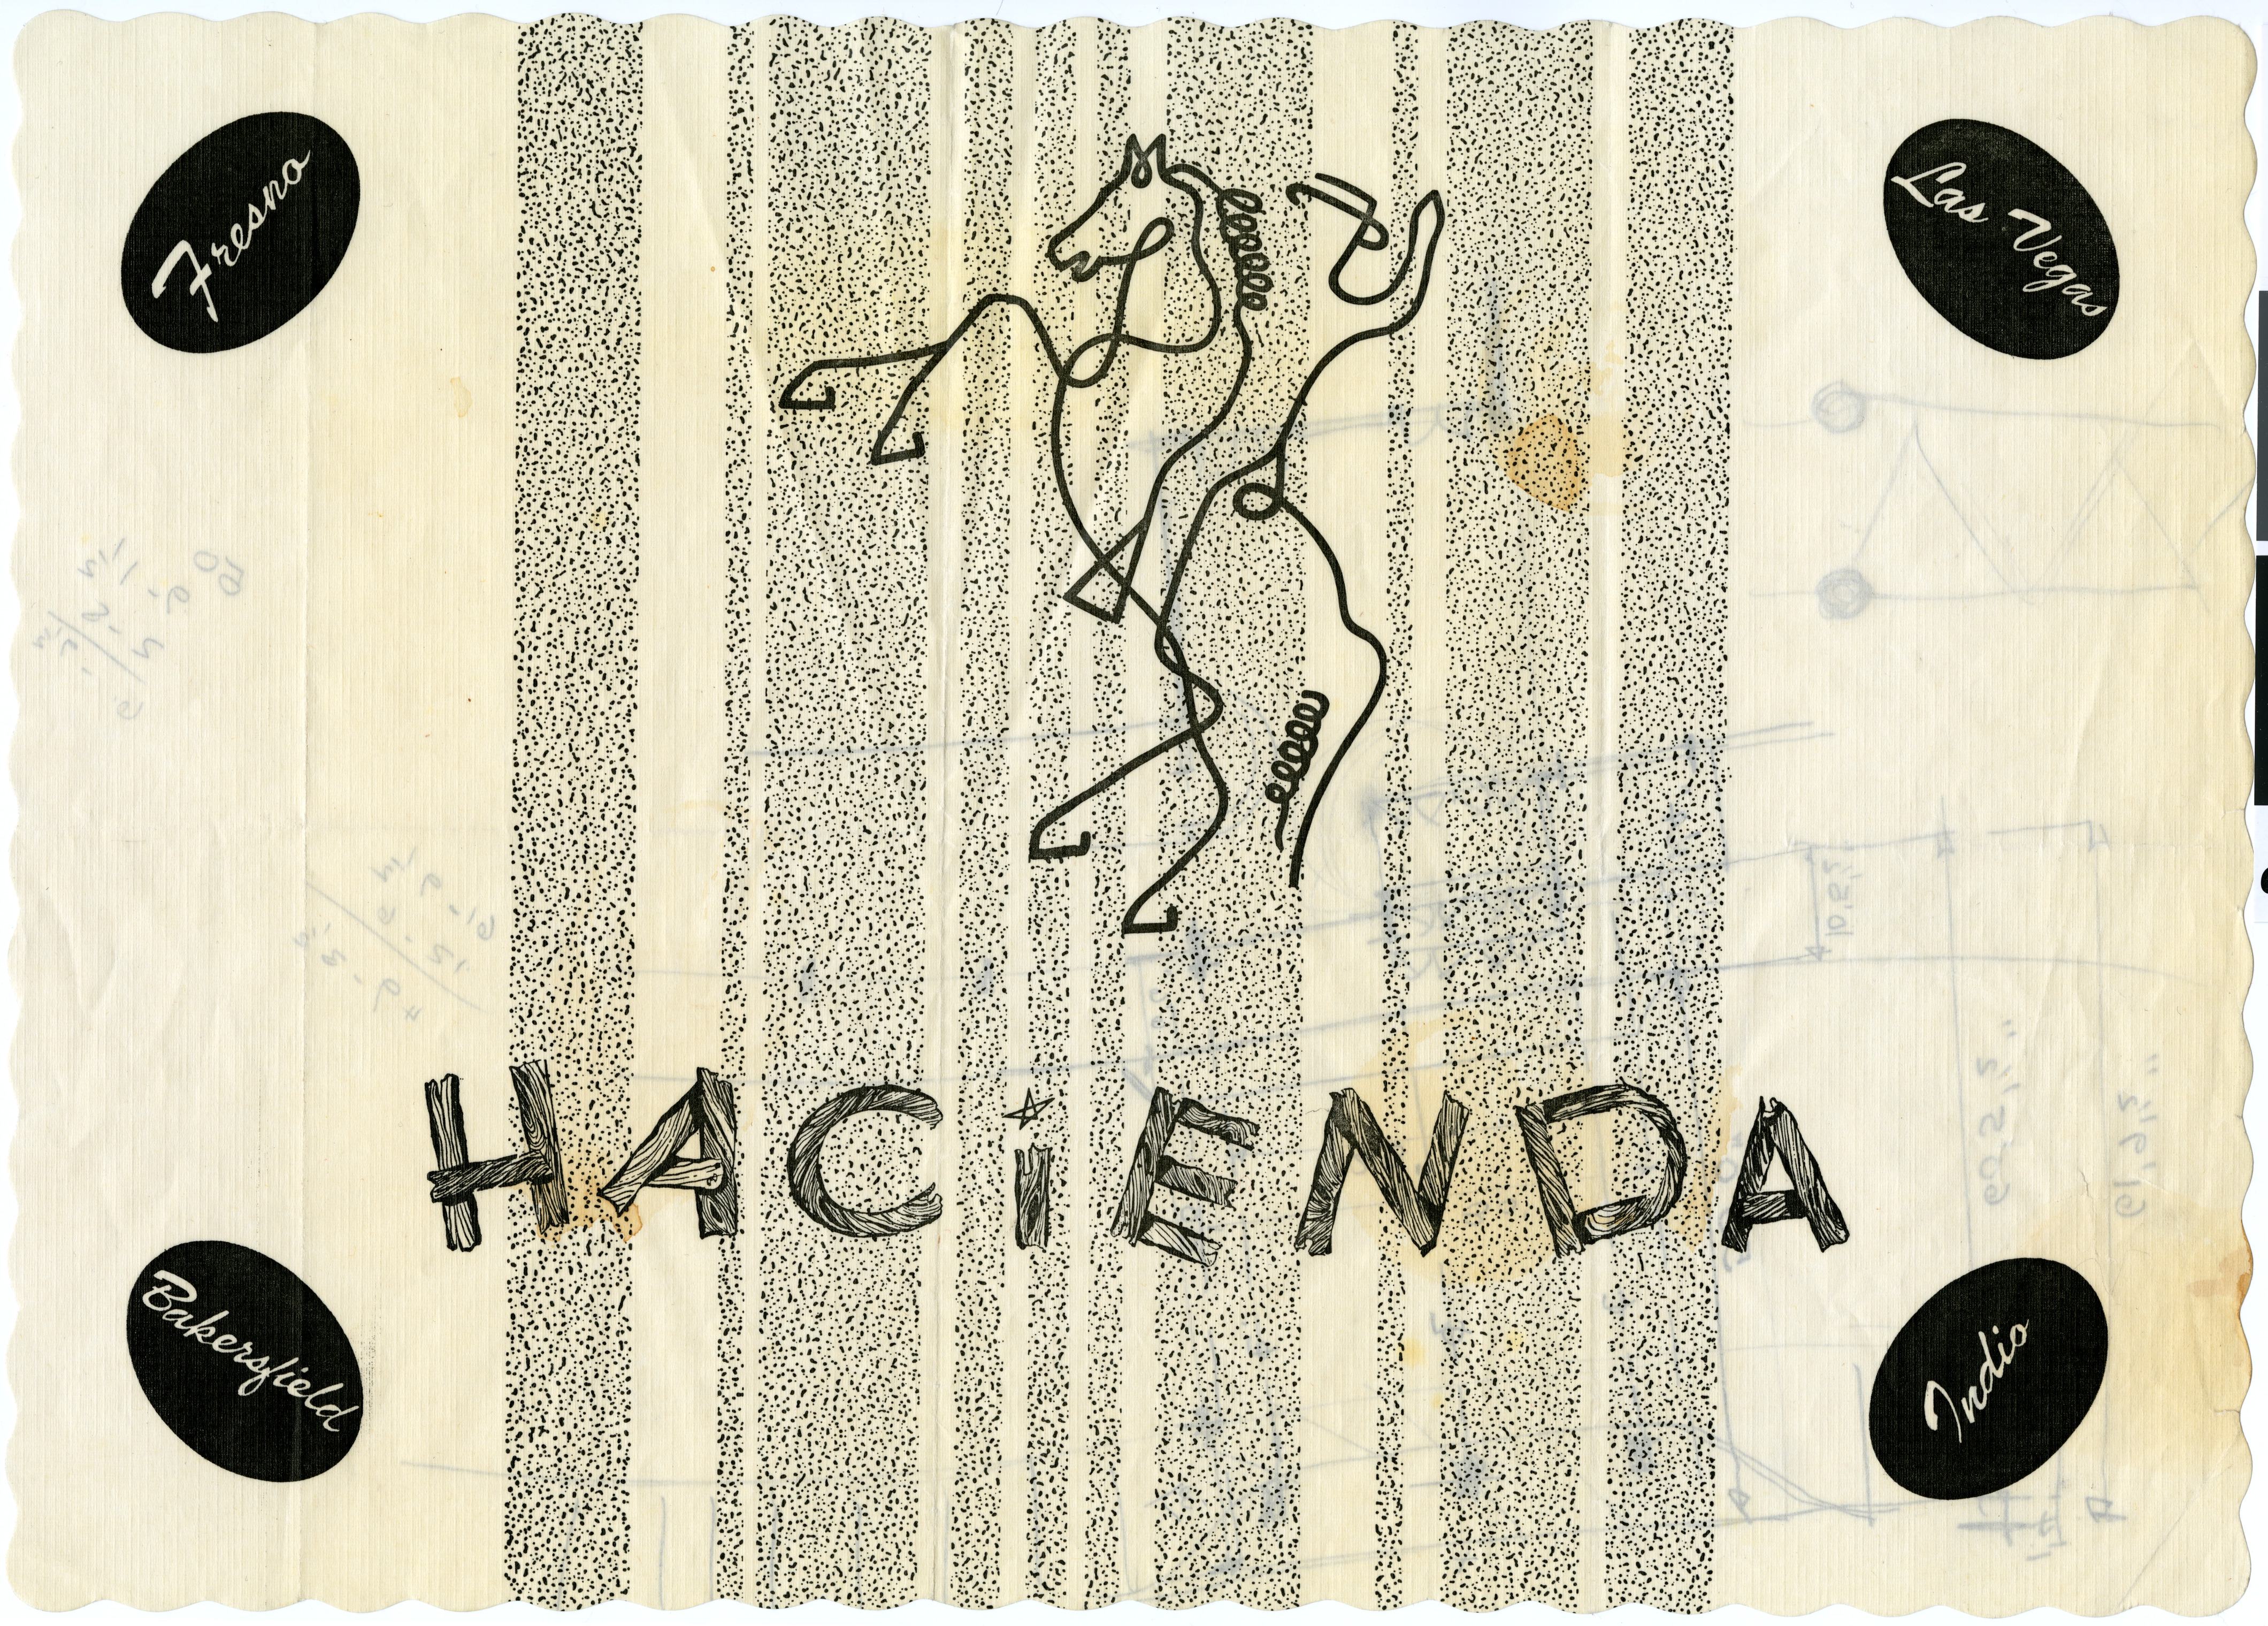 Architectural drawing of the Hacienda (Las Vegas), placemat with rough sketches, after 1956, image 2